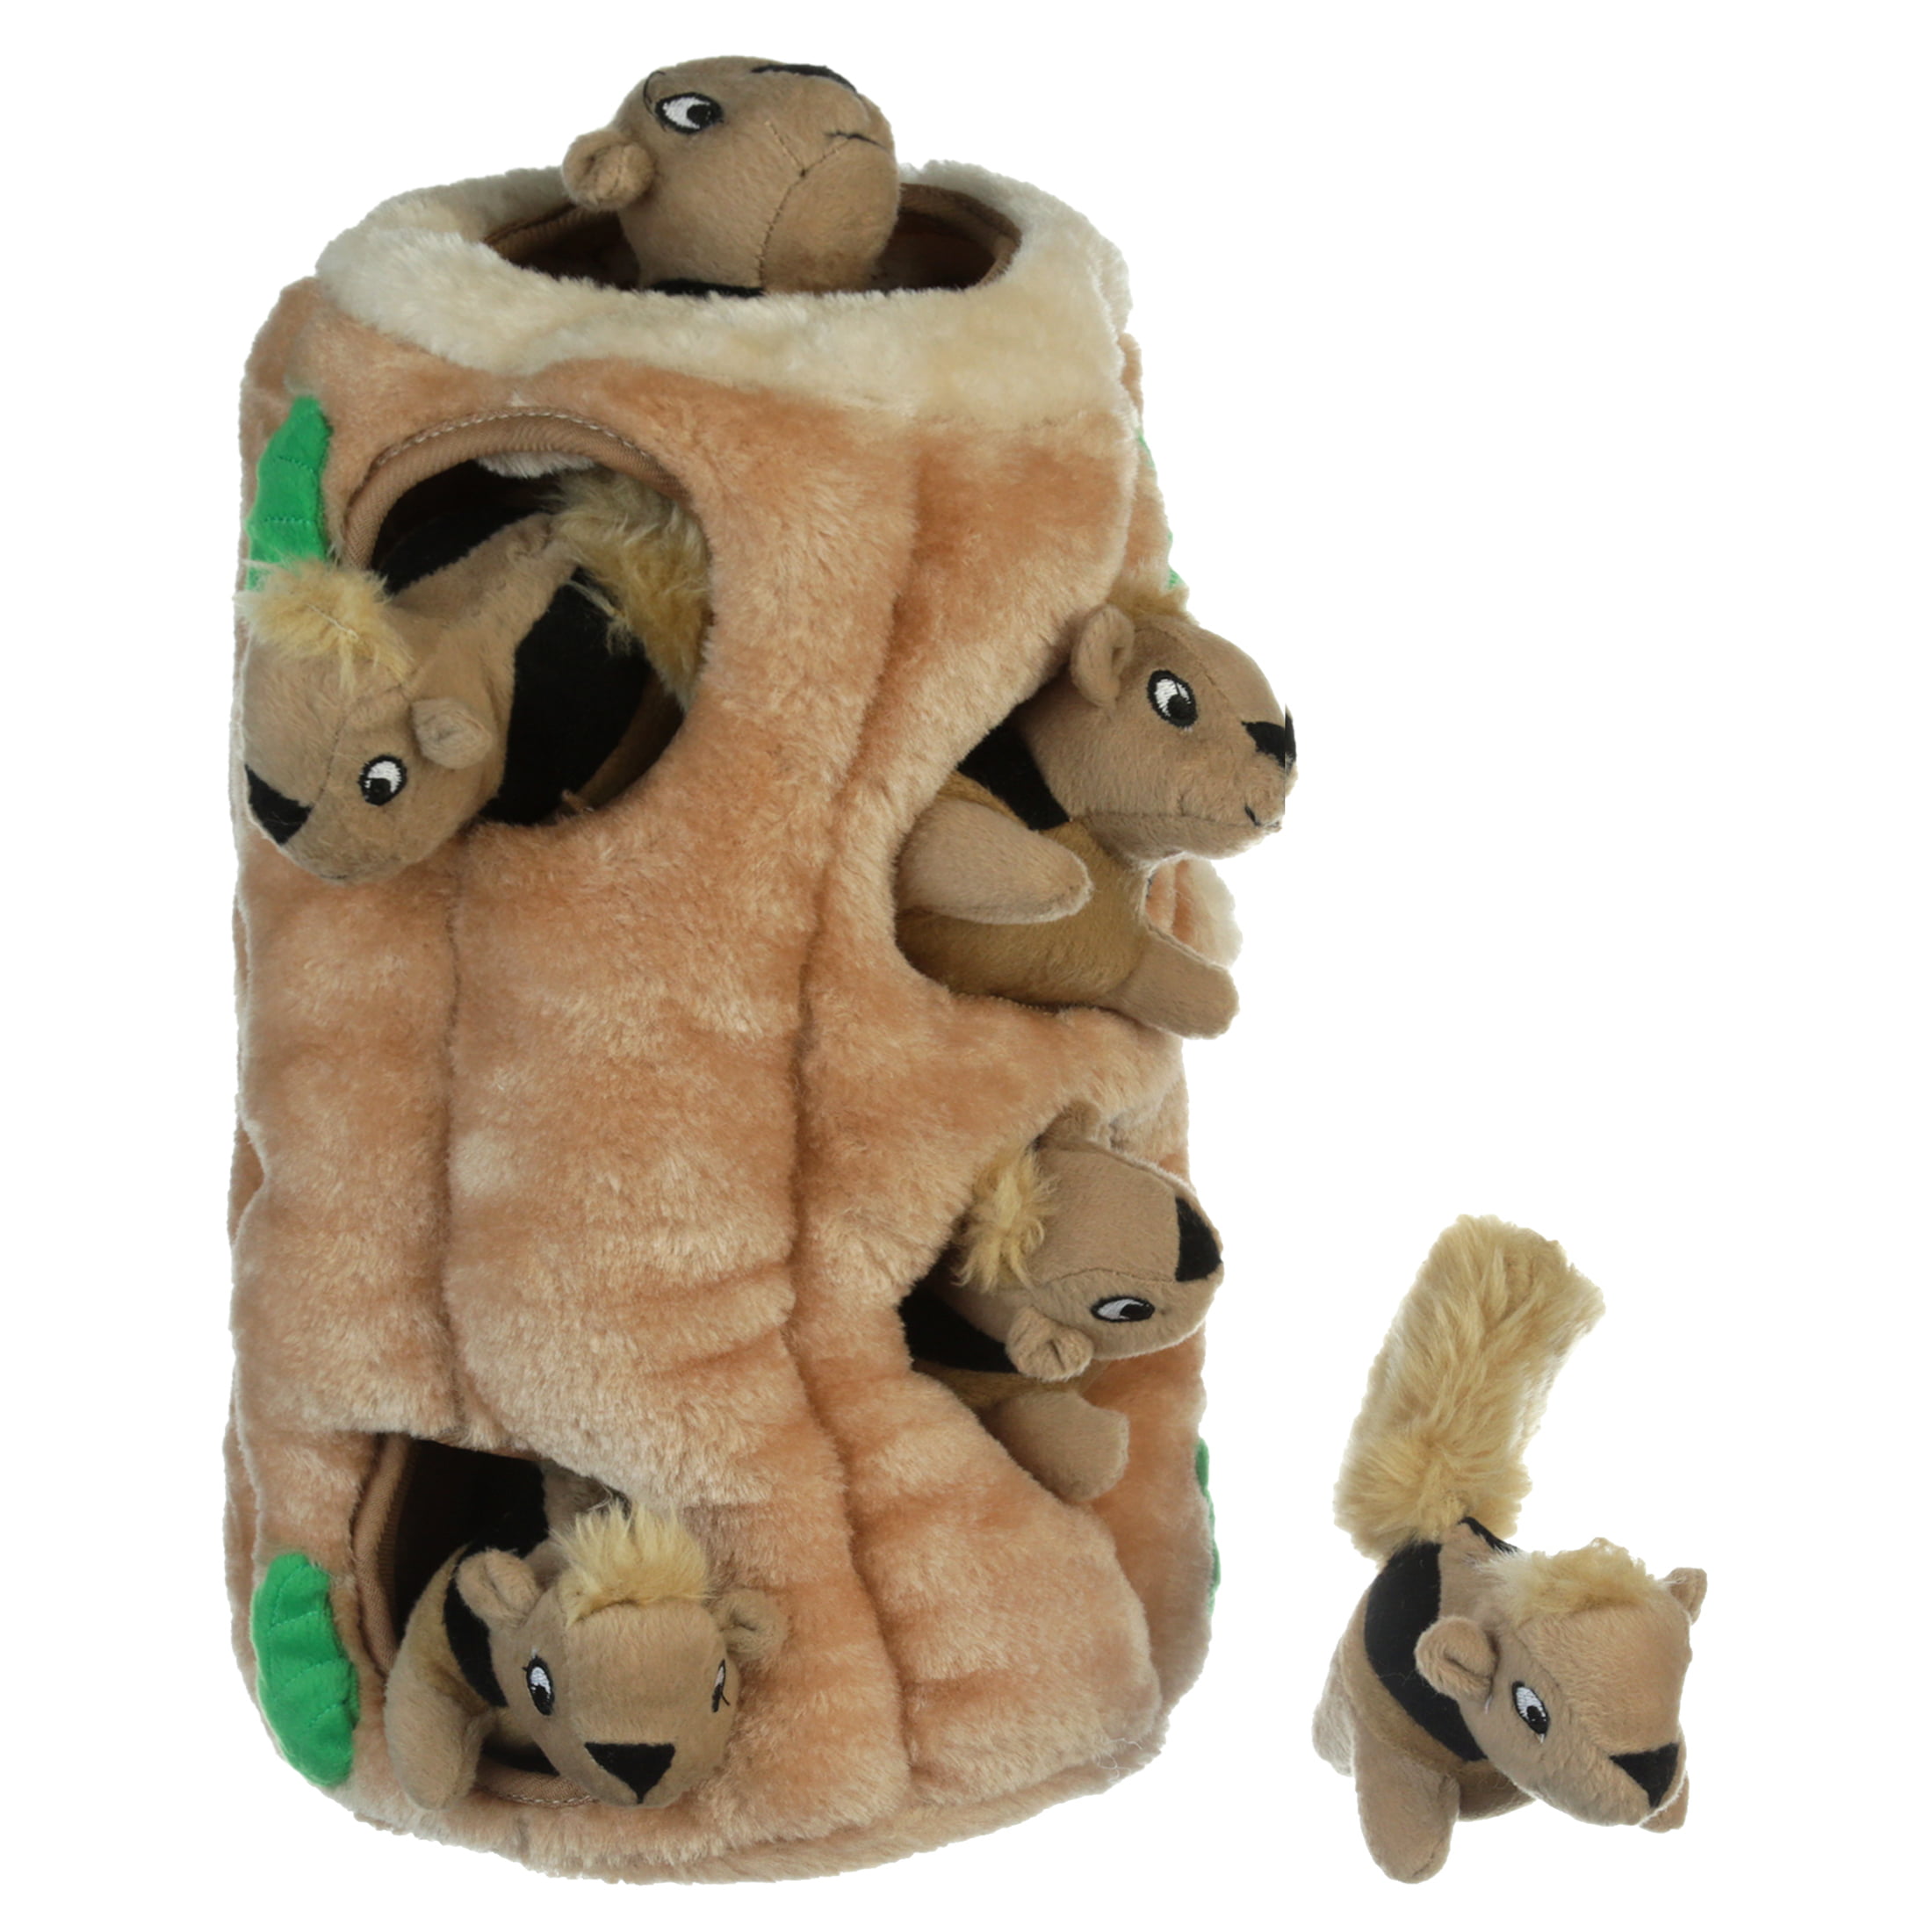 Outward Hound Hide A Squirrel Puzzle Dog Toy - Deer Park, NY - The Barn Pet  Feed & Supplies